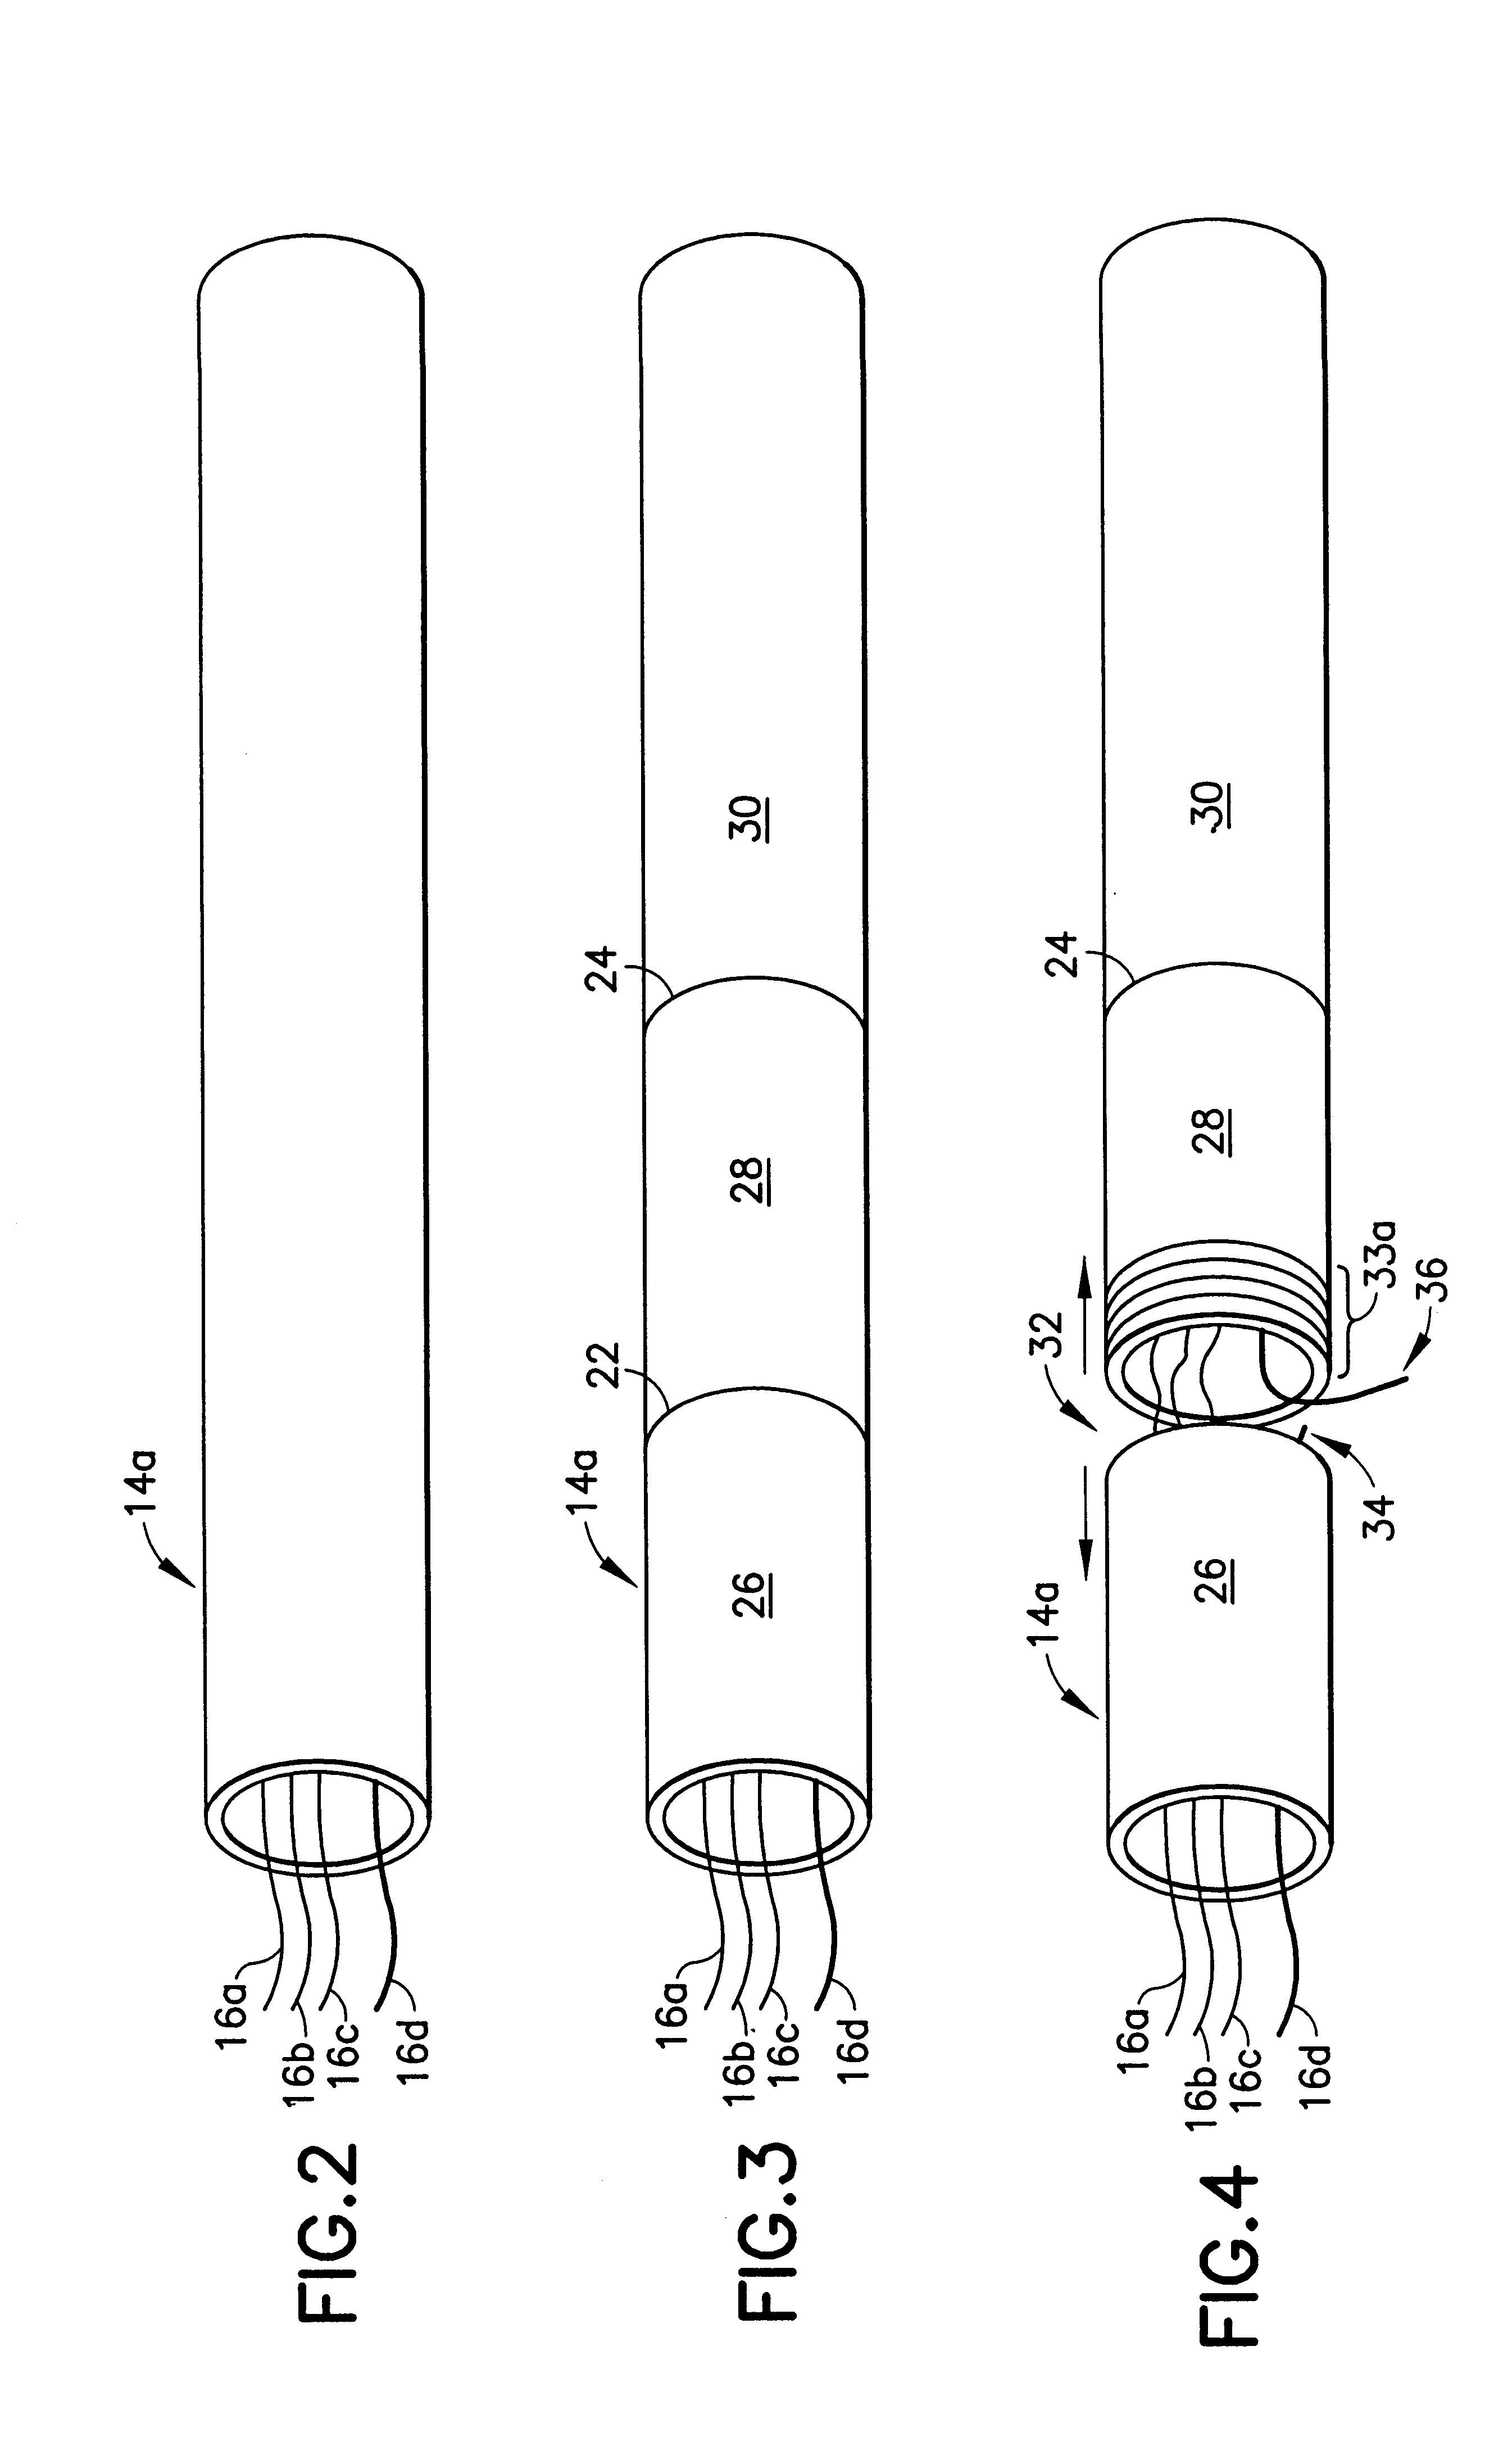 Method for accessing optical fibers contained in a sheath